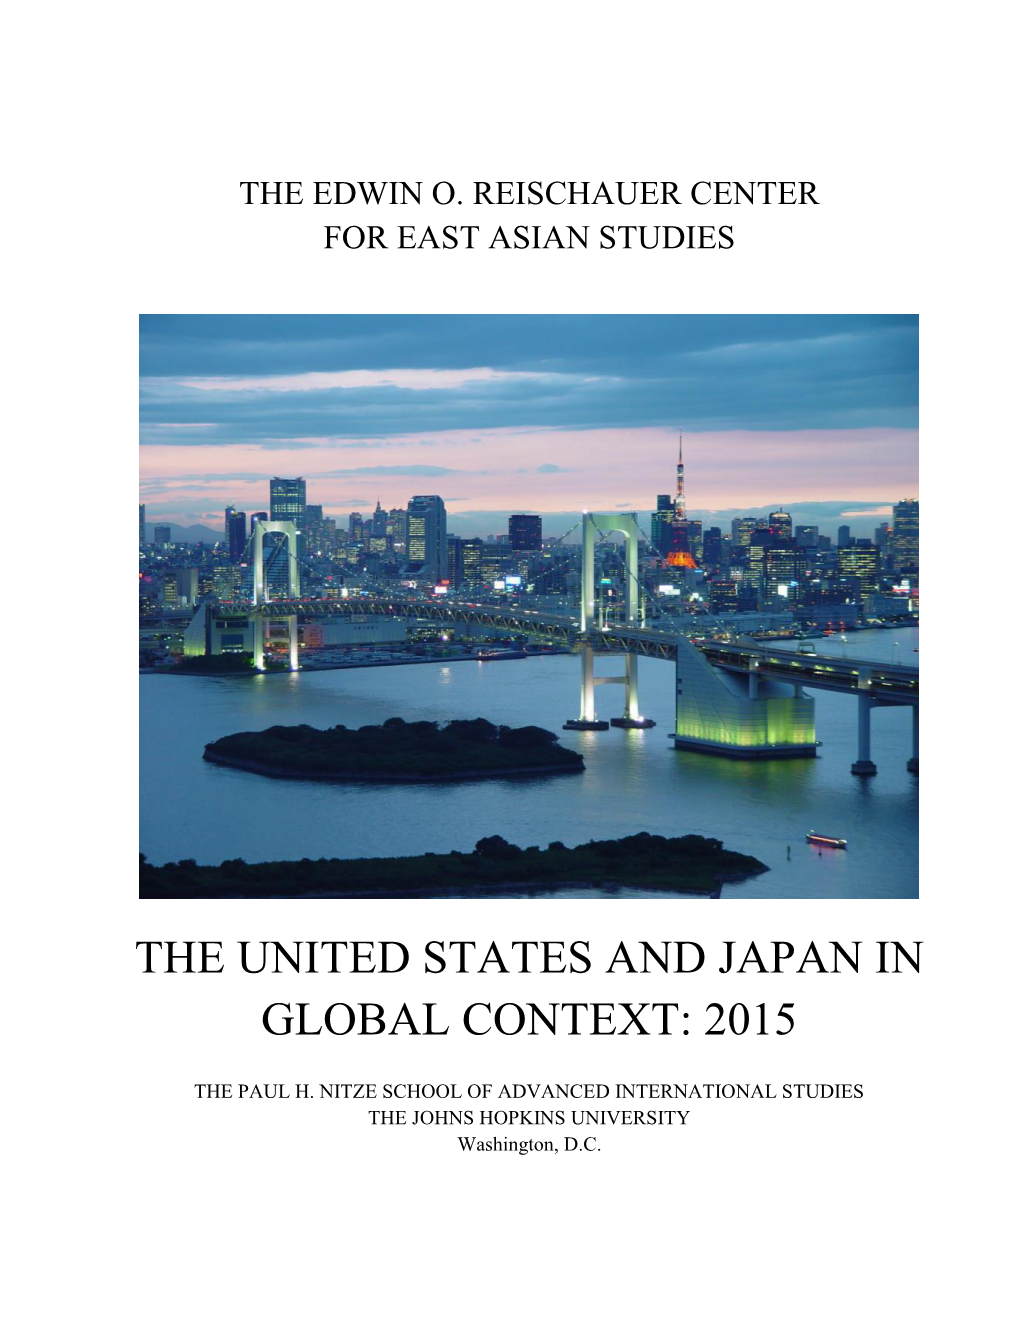 The United States and Japan in Global Context: 2015